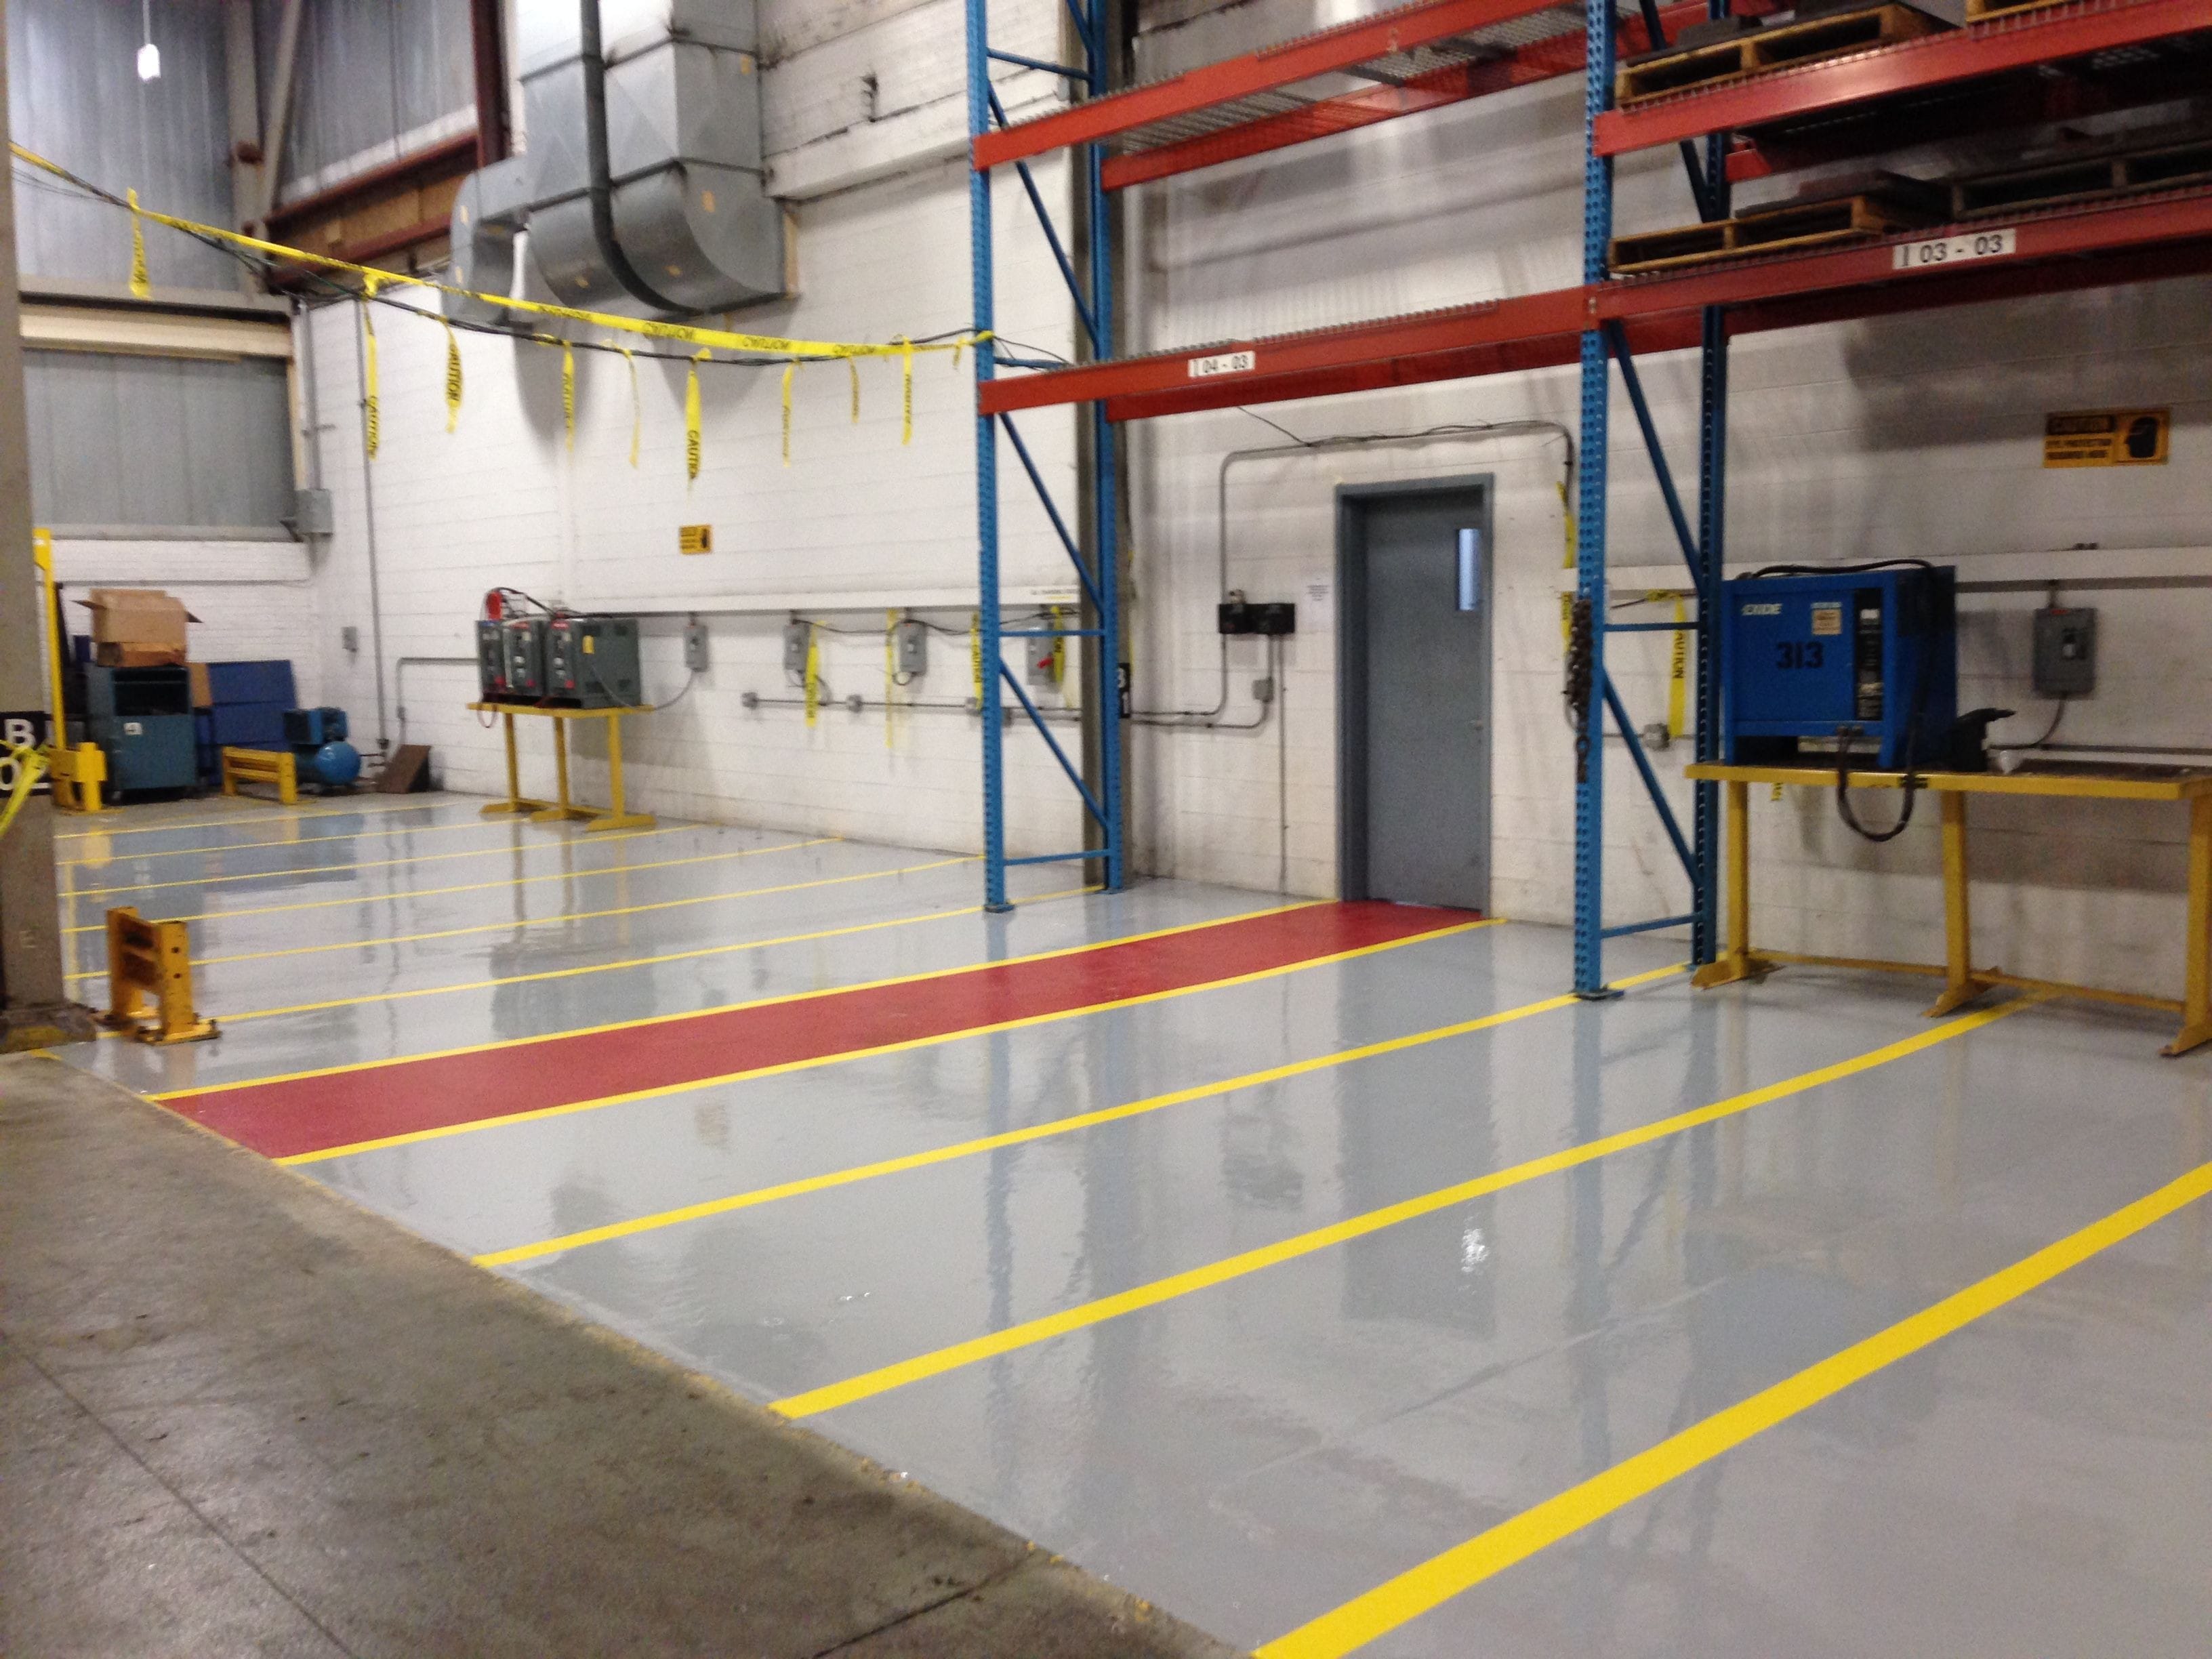 battery charging area in grey and yellow acid resistant epoxy